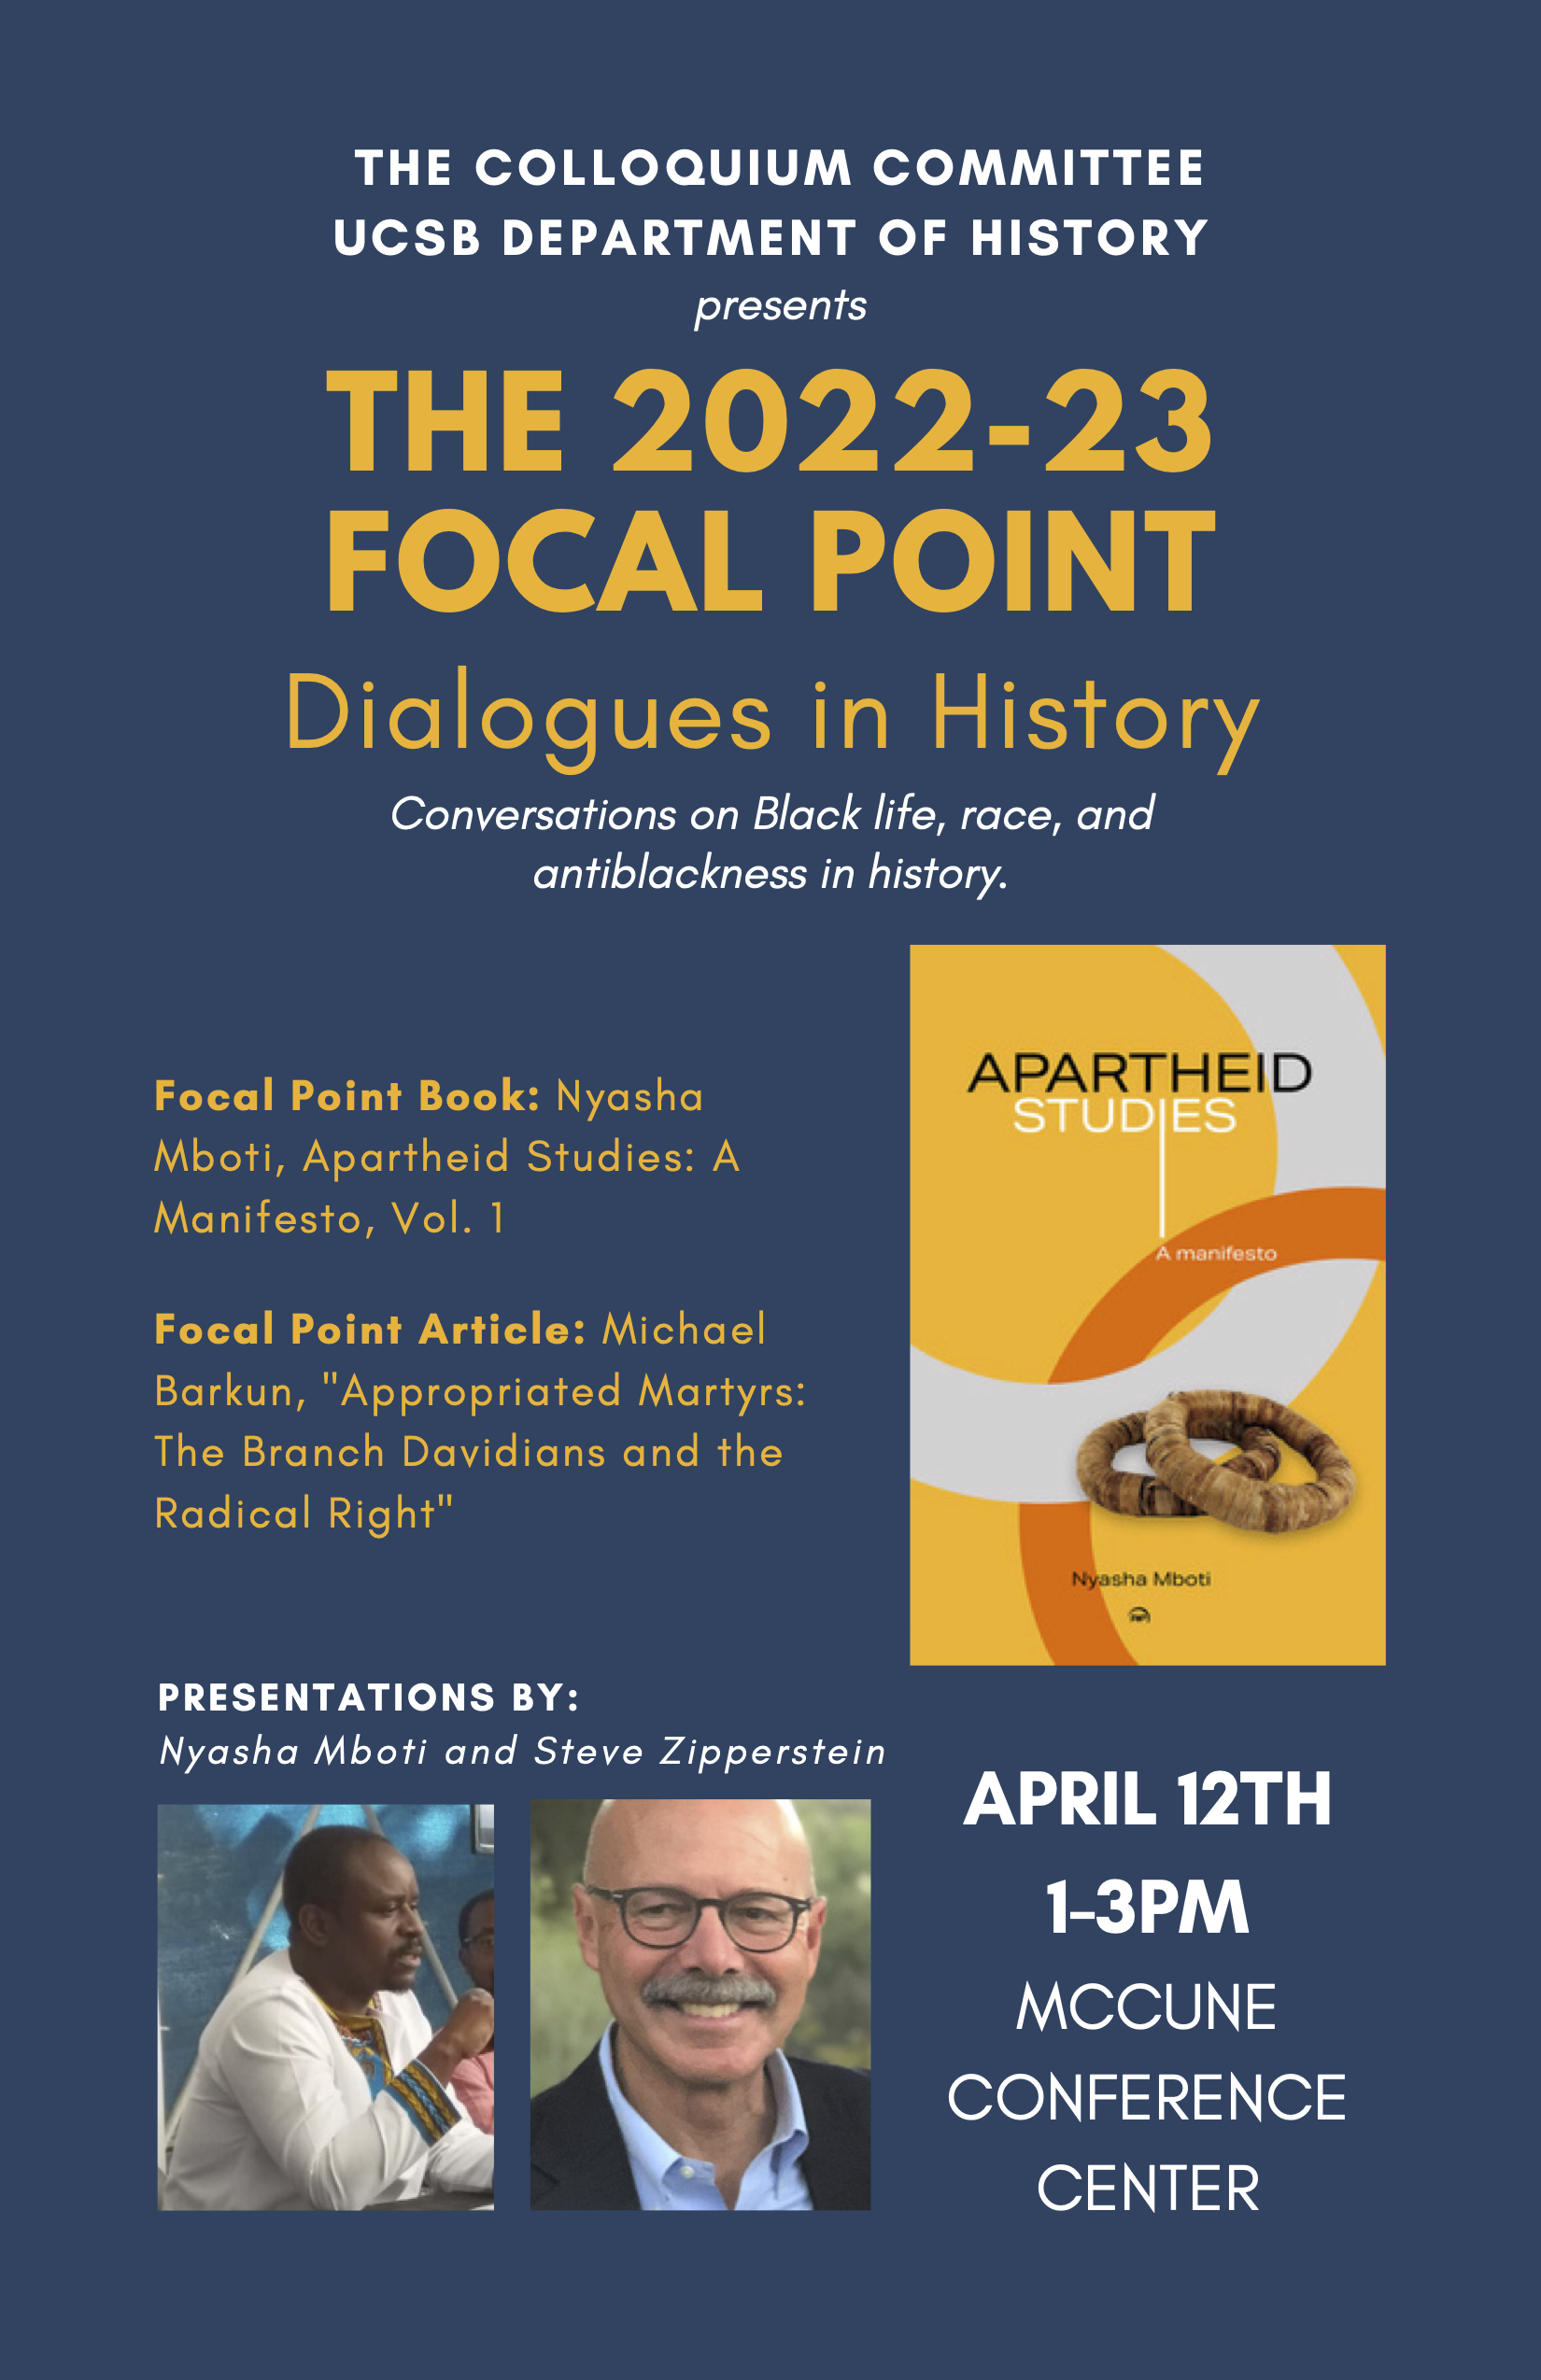 Flyer for "The 2022-23 Focal Point: Dialogues in History, Conversations on Black life, race, and antiblackness in history." on April 12 from 1-3PM in the McCune Conference Center